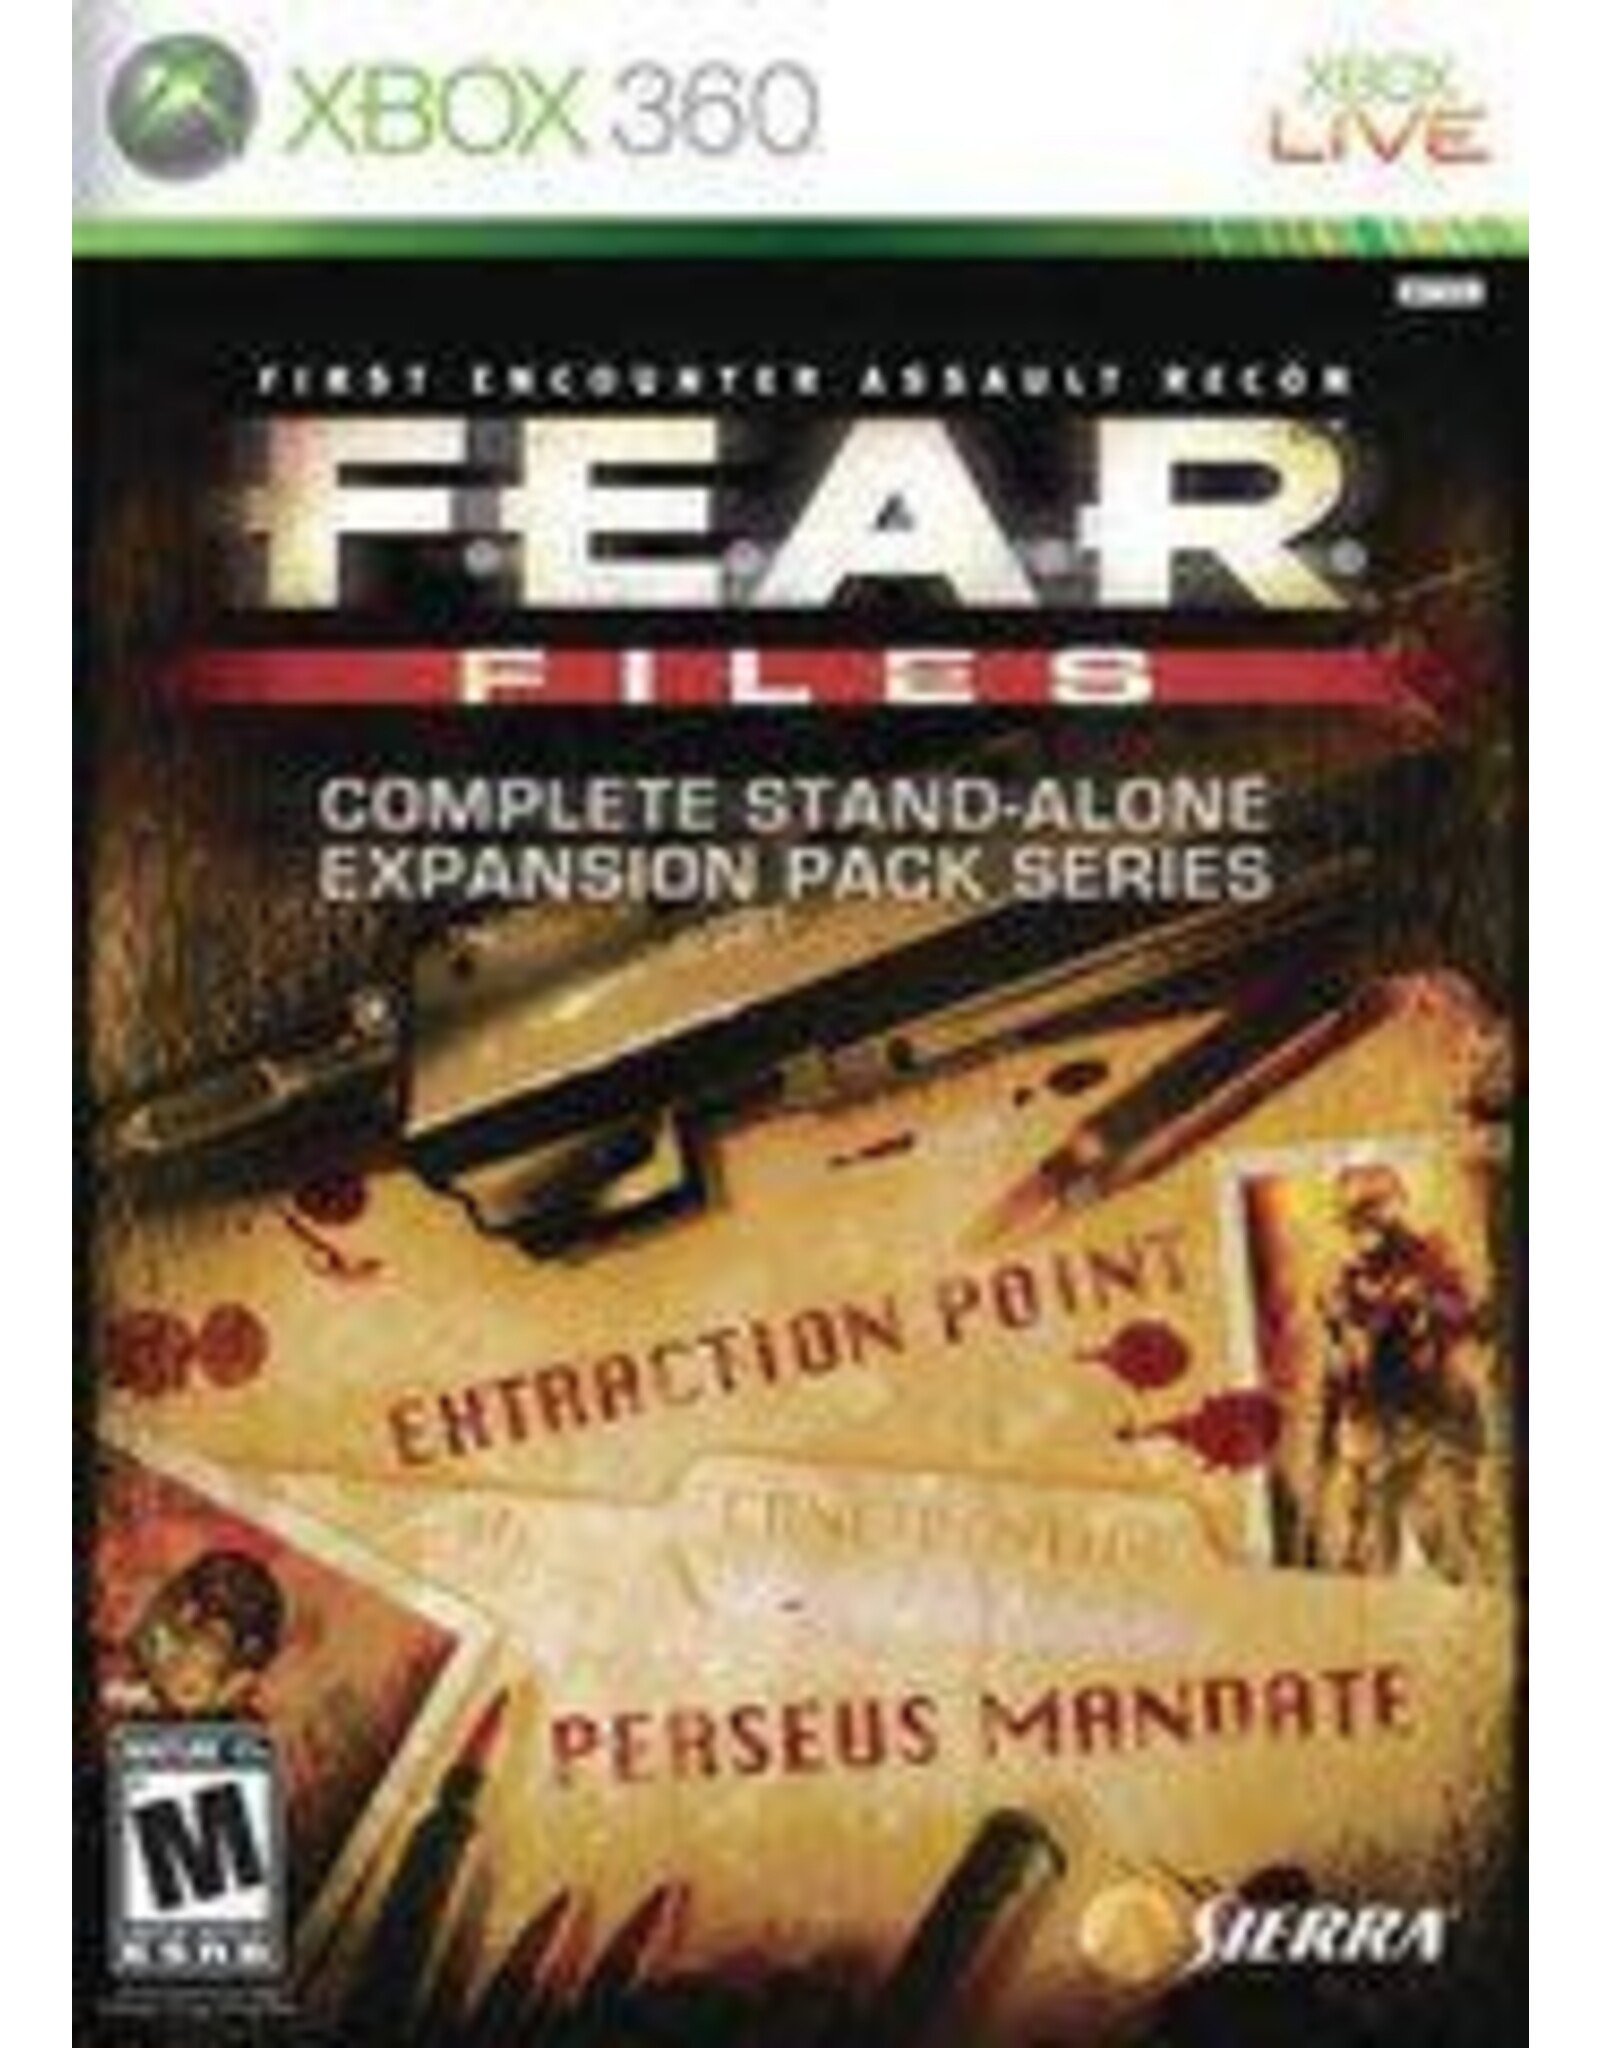 Xbox 360 FEAR Files (Used)